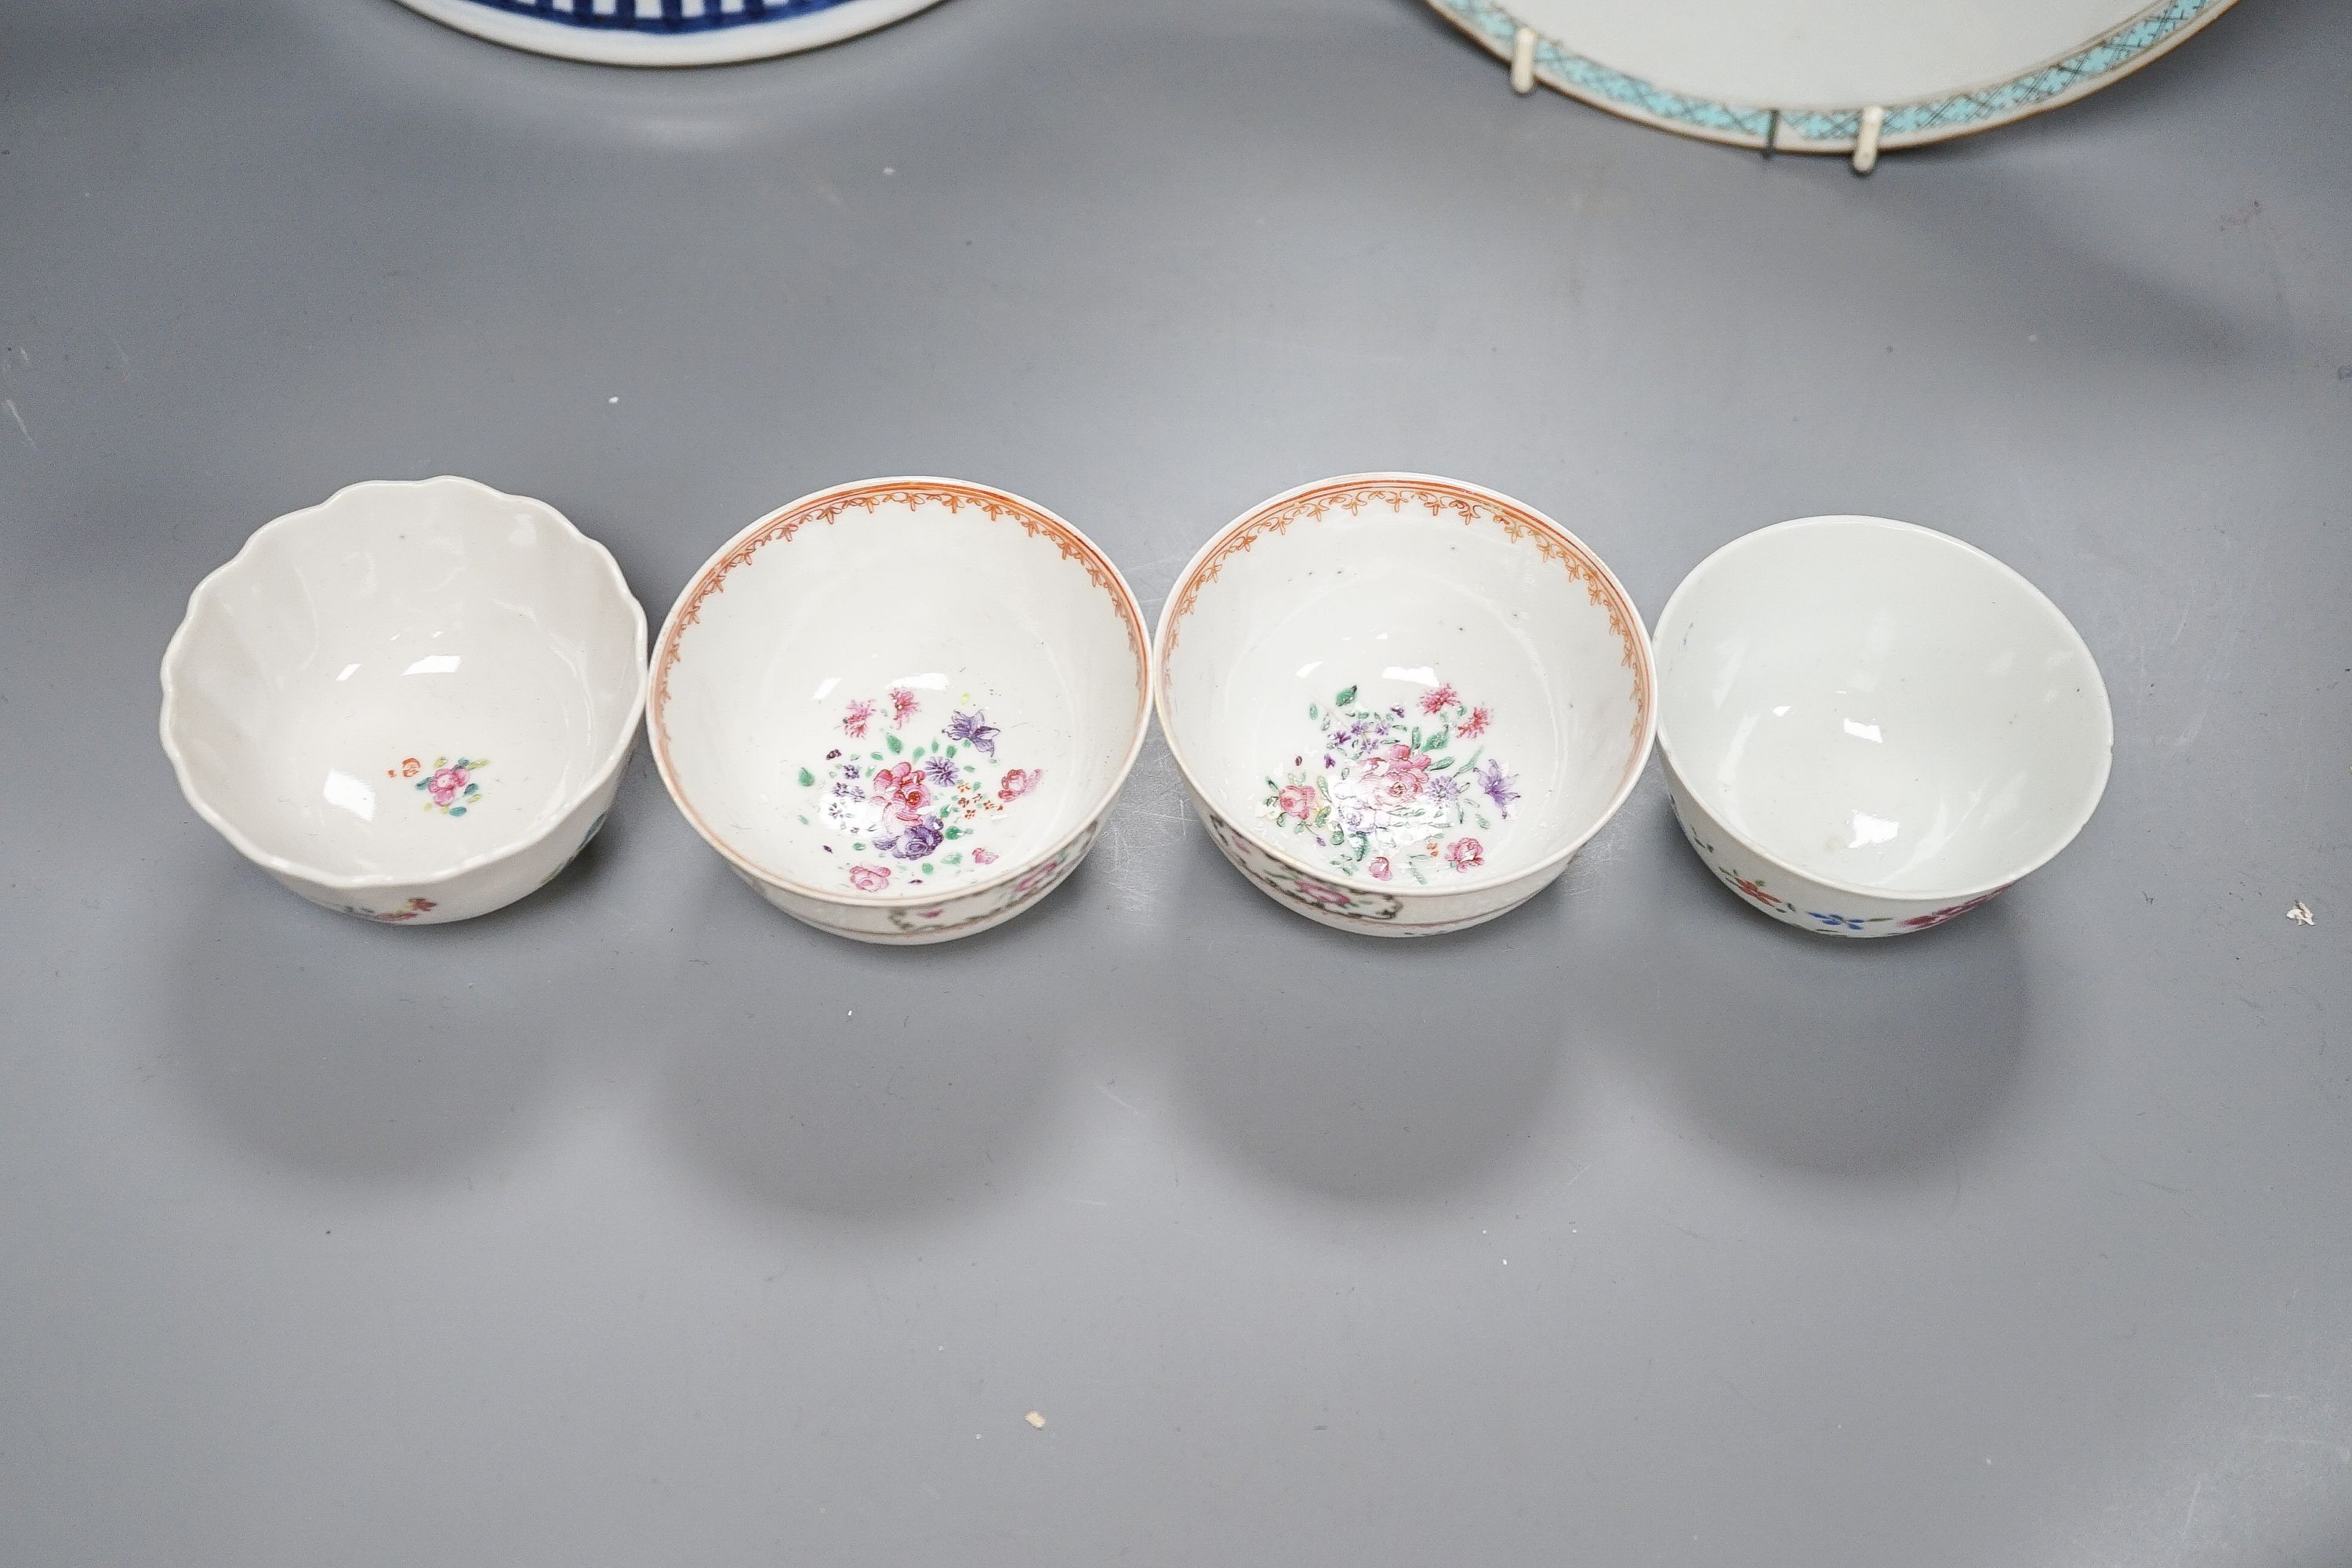 A 19th century Chinese blue and white Prunus jar and cover, 36cm and a group of 18th century Chinese export famille rose tea bowls and a plate